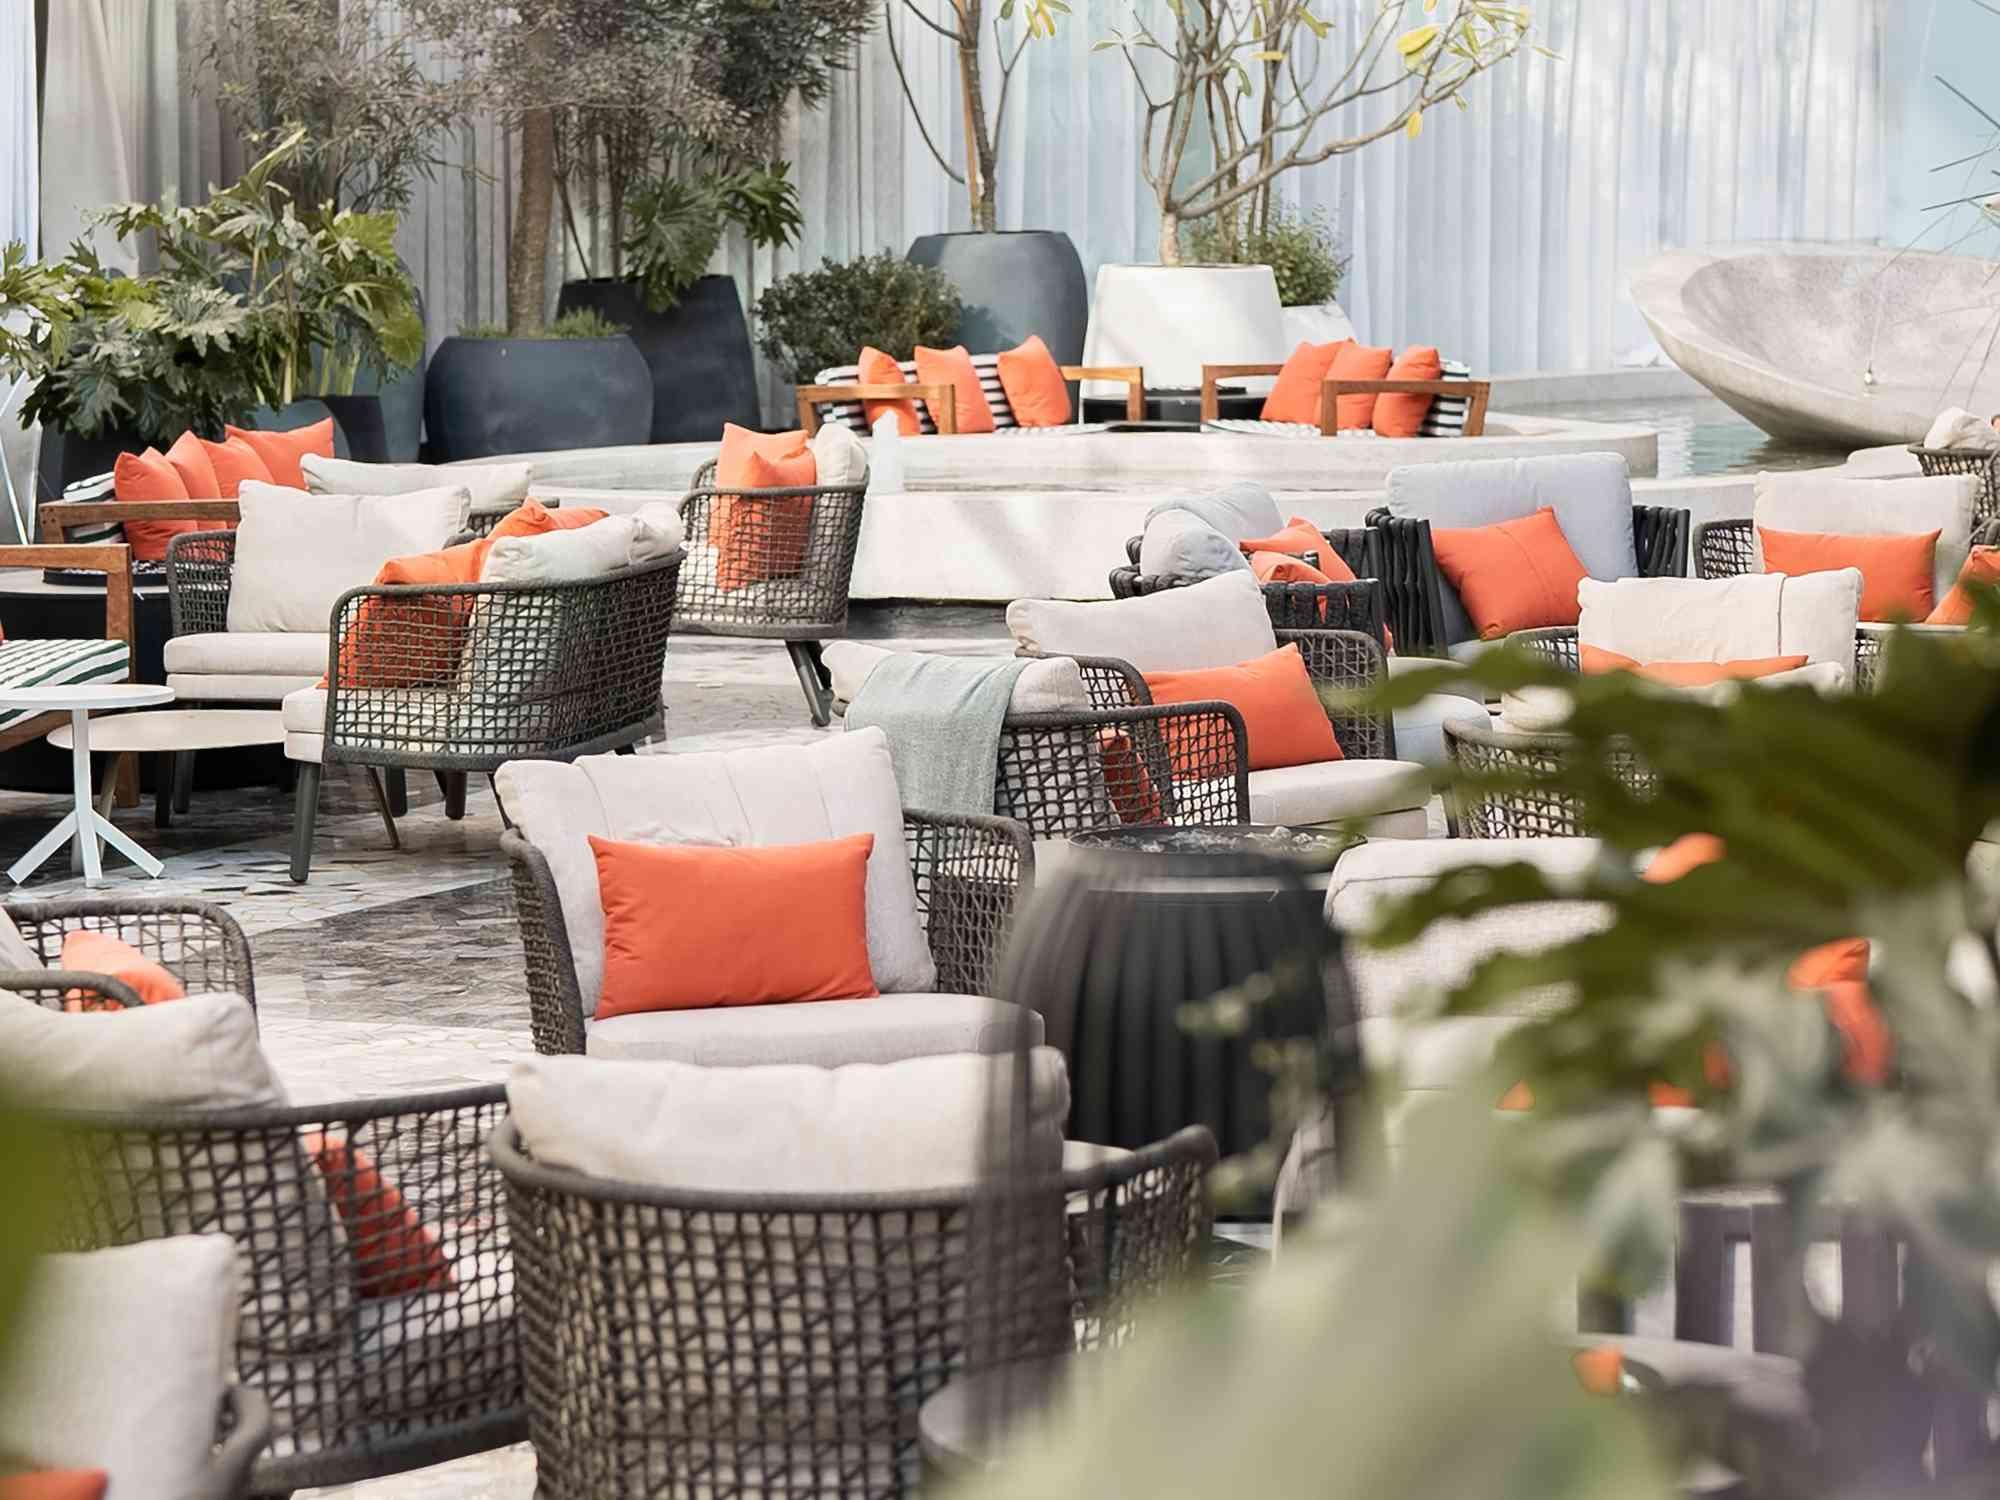 outdoor seating area at La Terraza with wicker furniture 